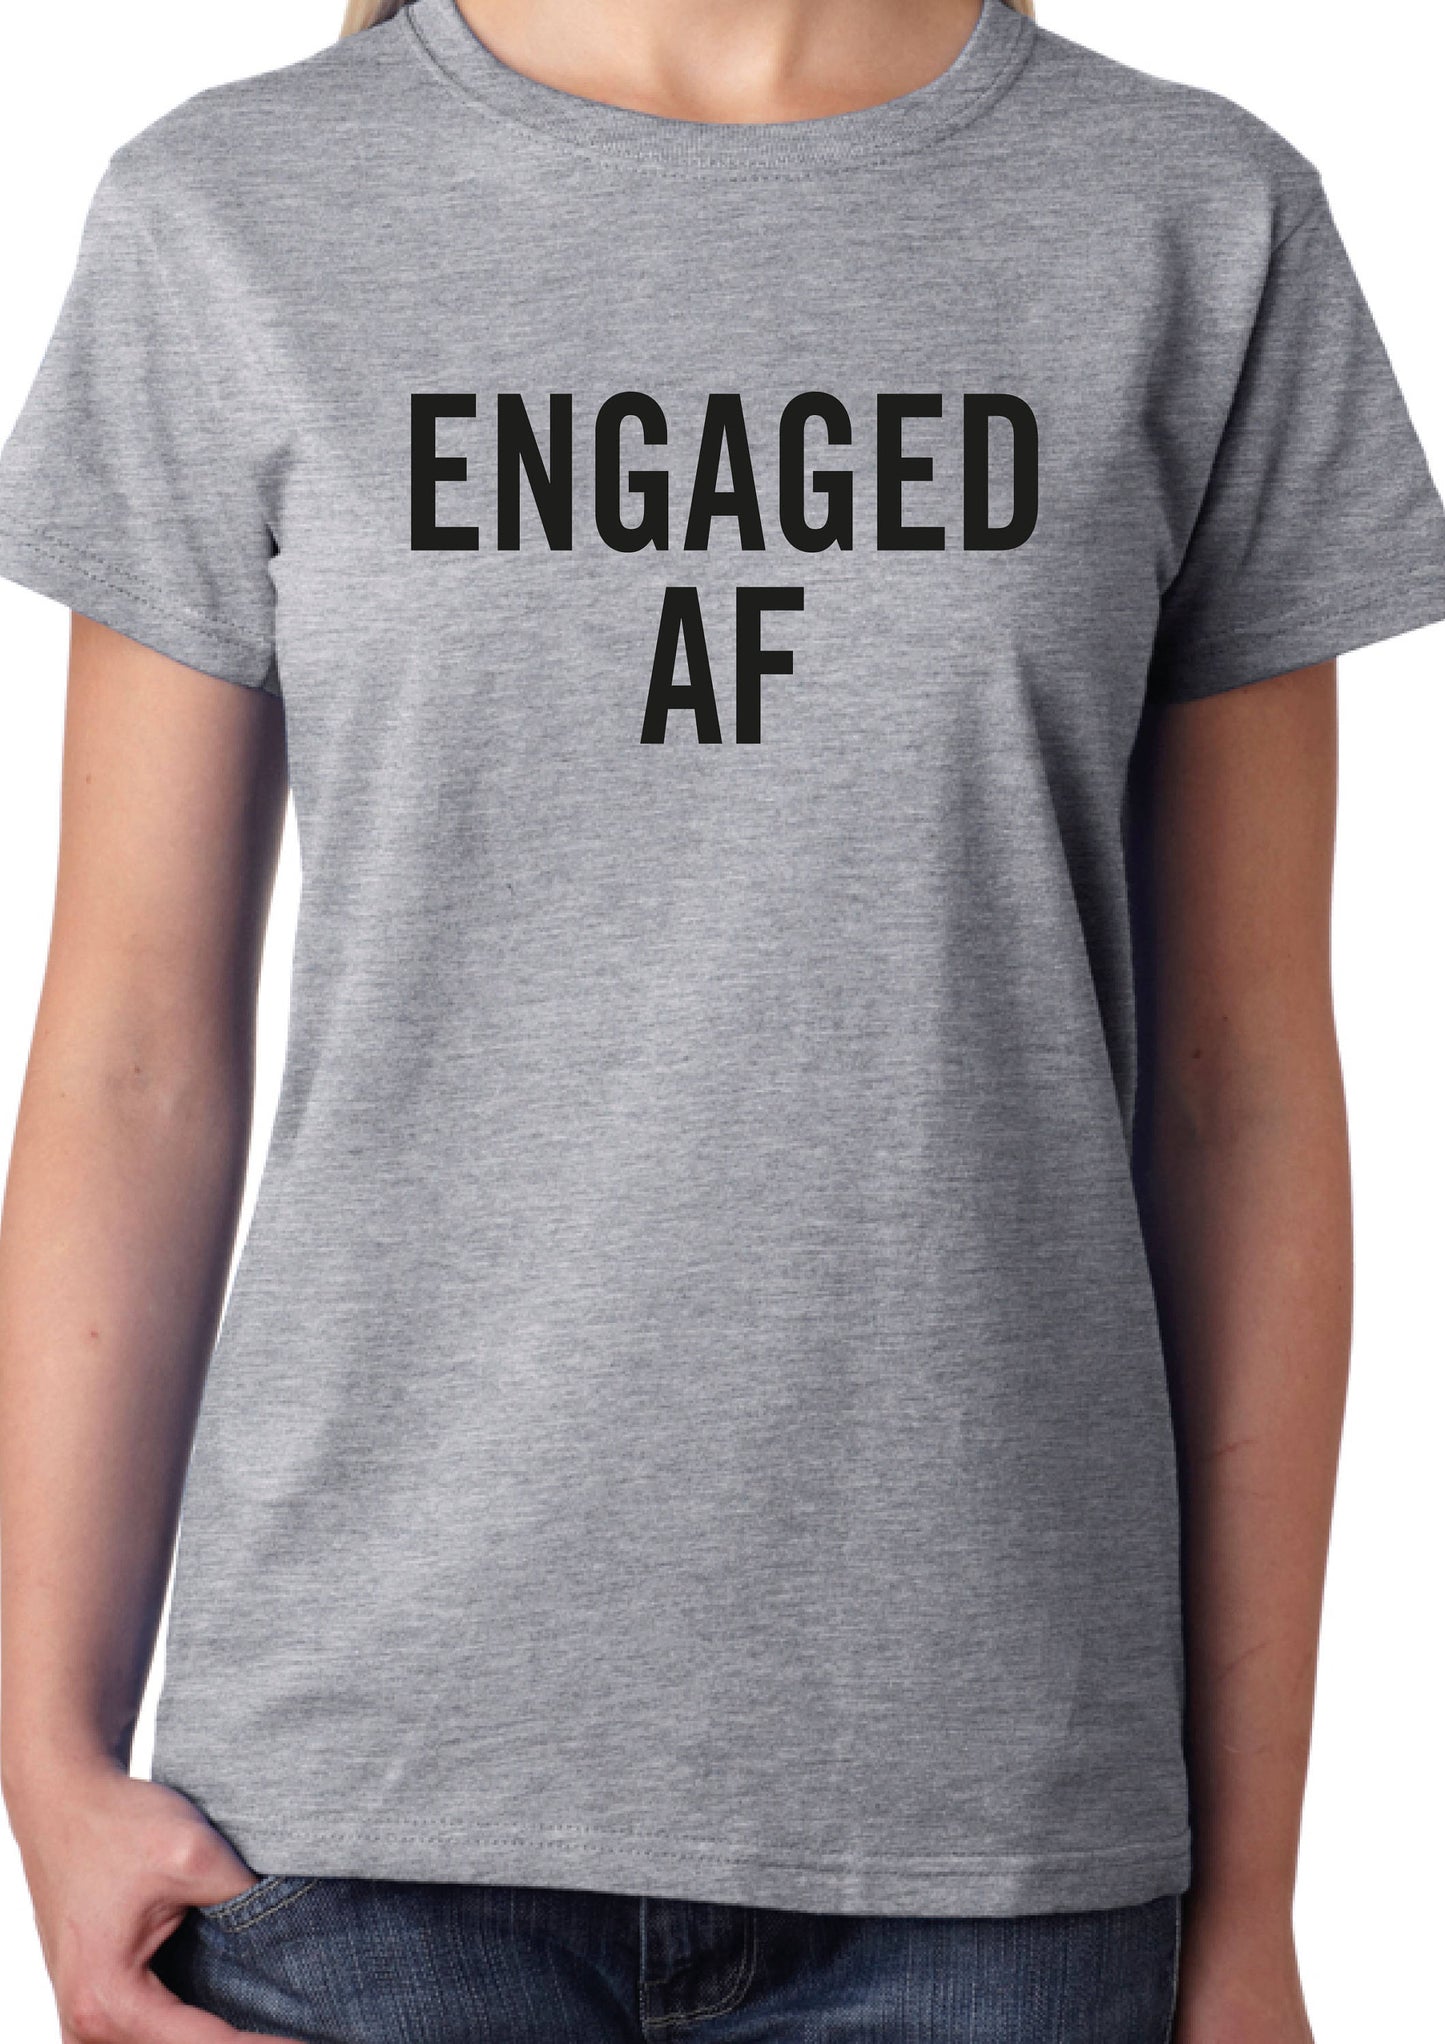 Engaged AF T-Shirt, Ladies or Unisex Funny Cool Engagement Gift